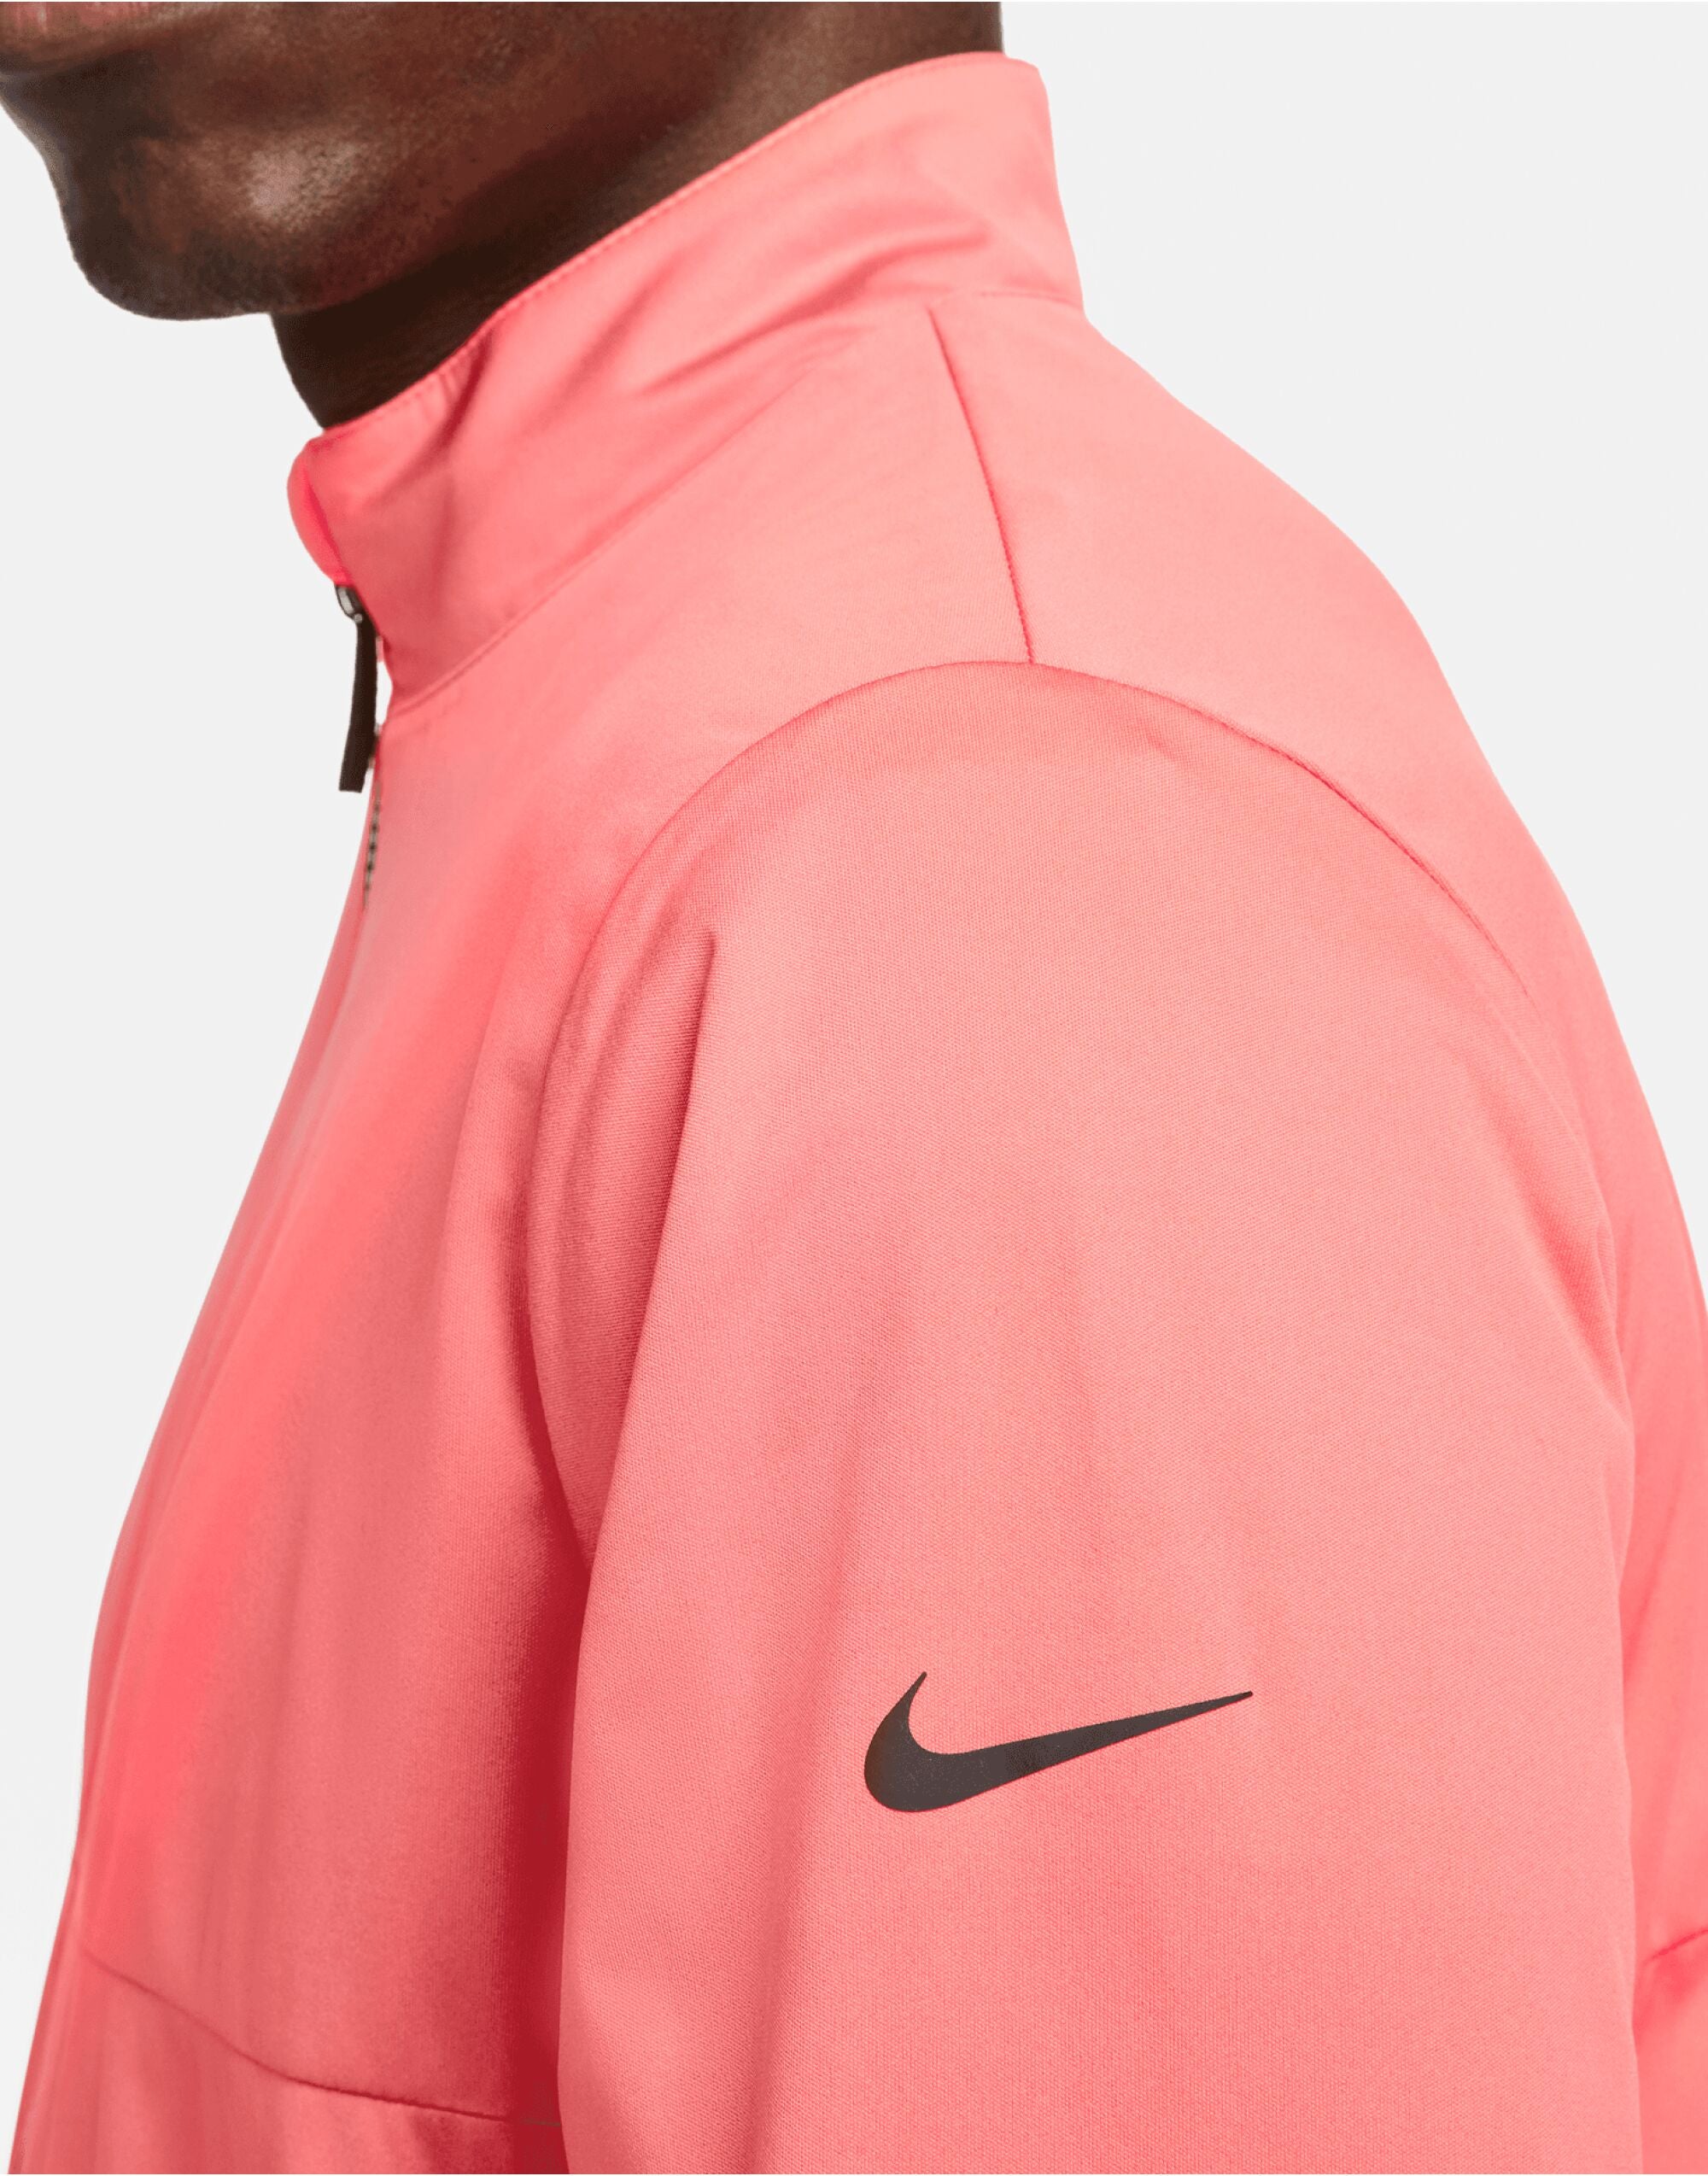 Nike Golf Storm-FIT Victory Full Zip Jacket Made from quiet, weather-resistant fabric (DA2867)